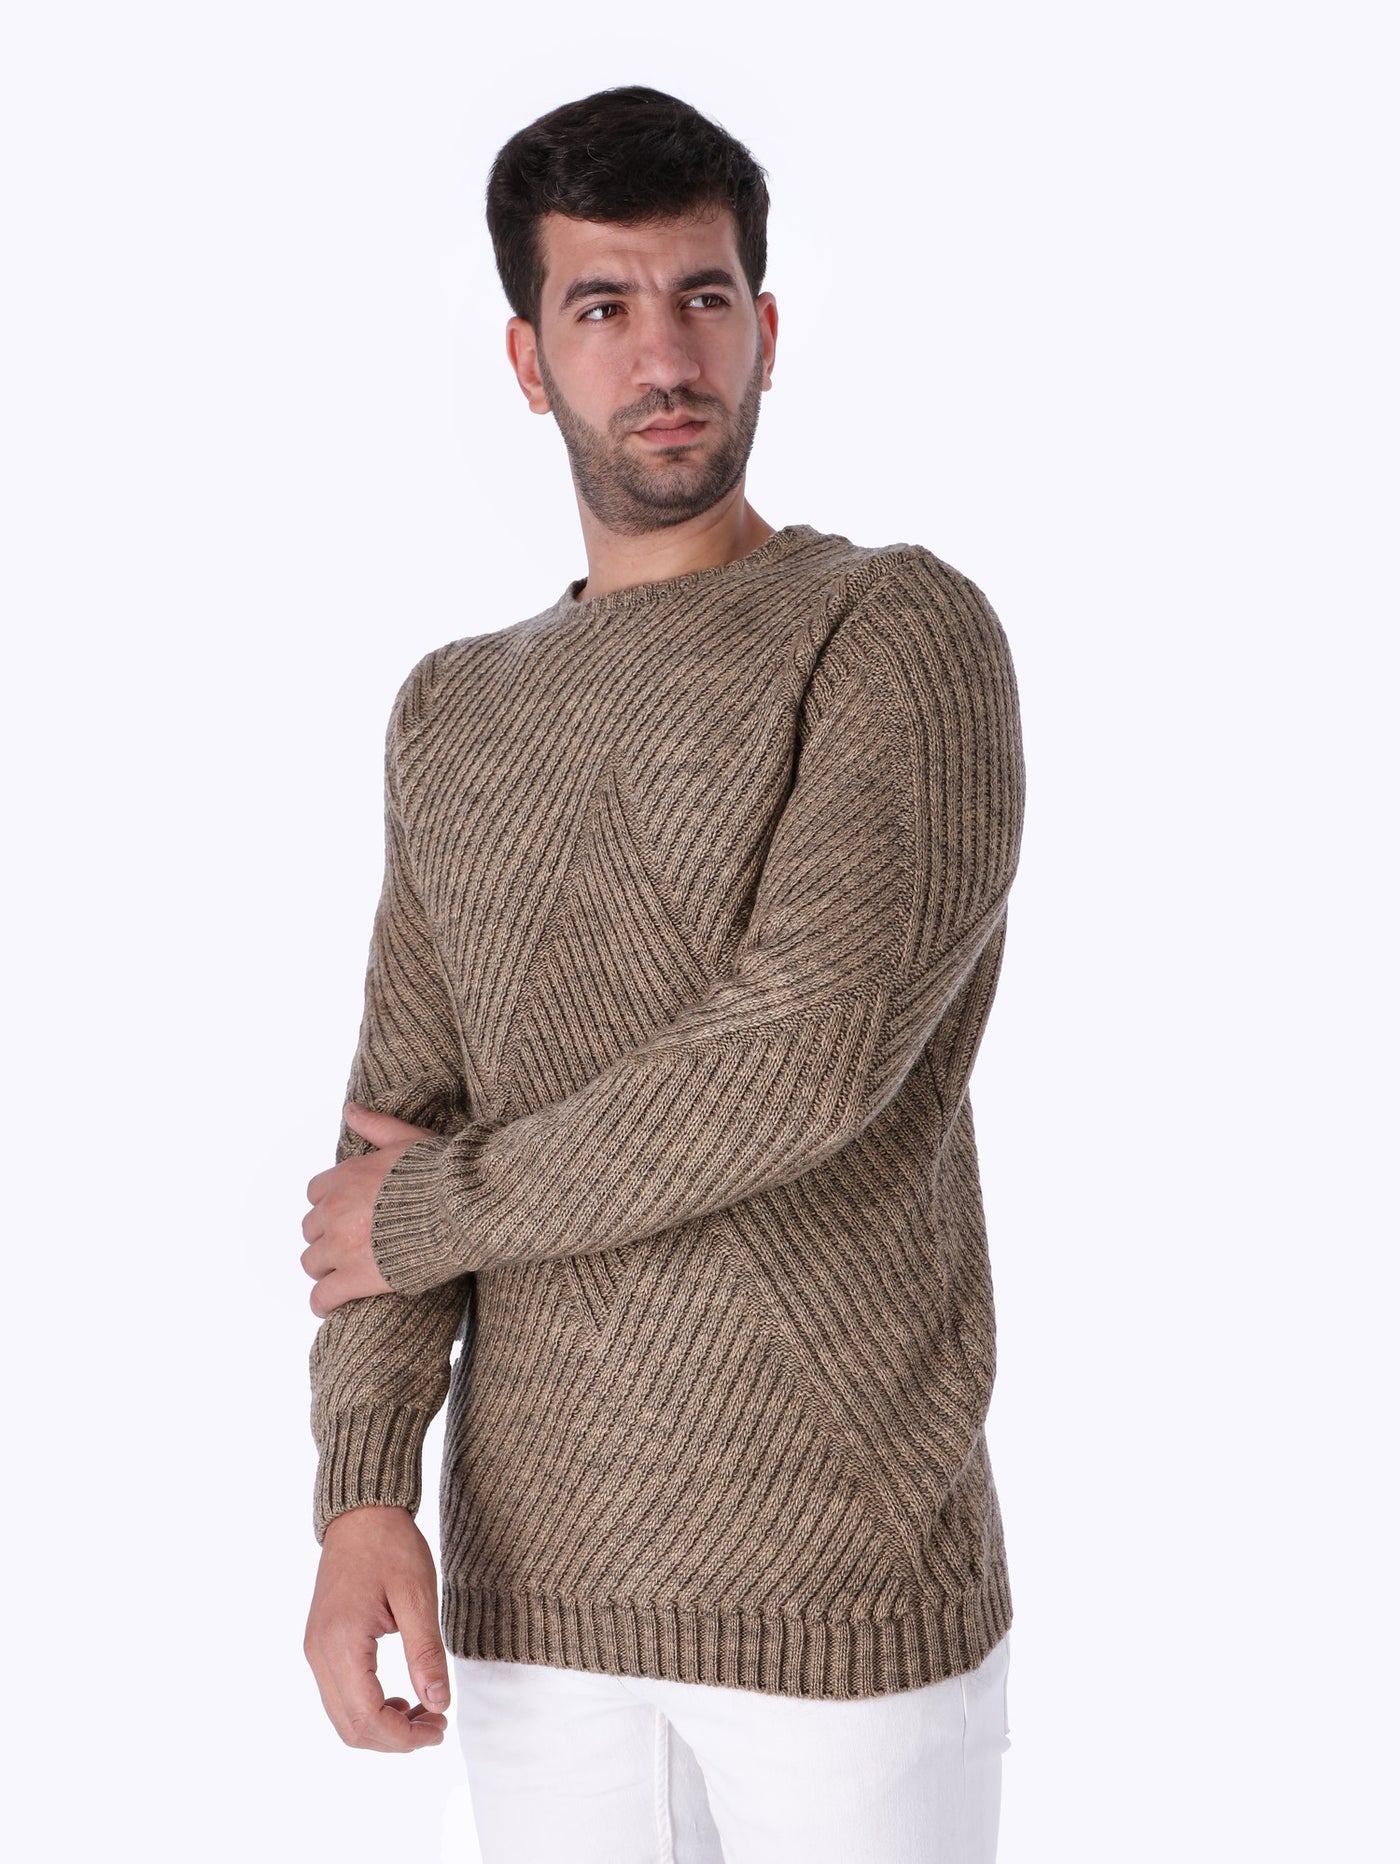 OR Mens Patterned Crew Neck Sweater